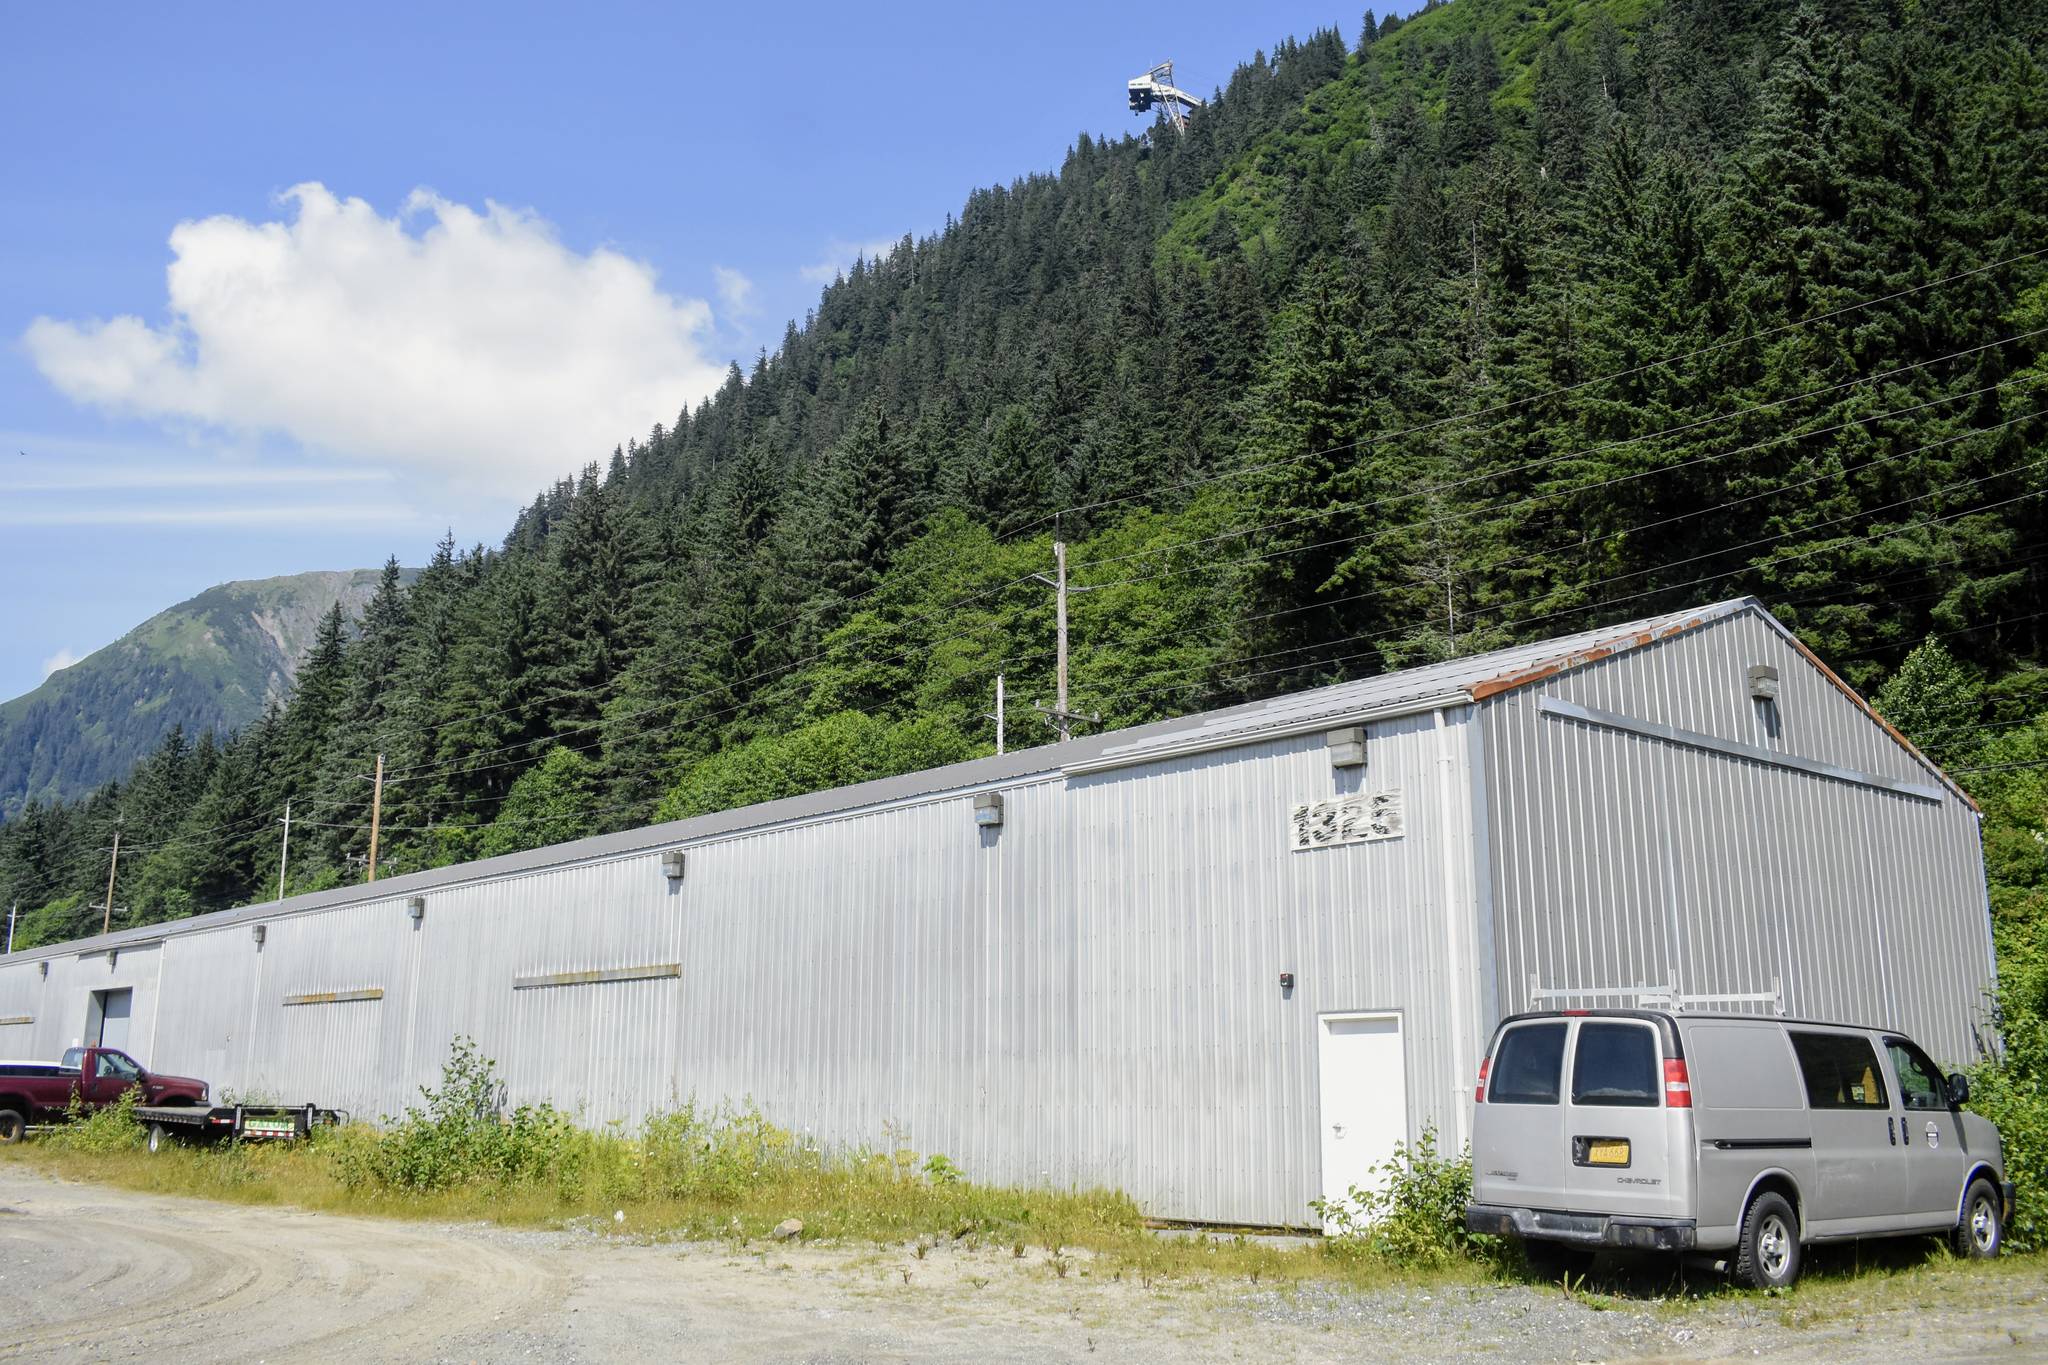 A surplus warehouse at 1325 Eastaugh Way, off Thane Road, is being considered by the City and Borough of Juneau as a possible location for a ballot-counting center should the city decide to increase its use of voting by mail in future municipal elections. (Peter Segall / Juneau Empire File)